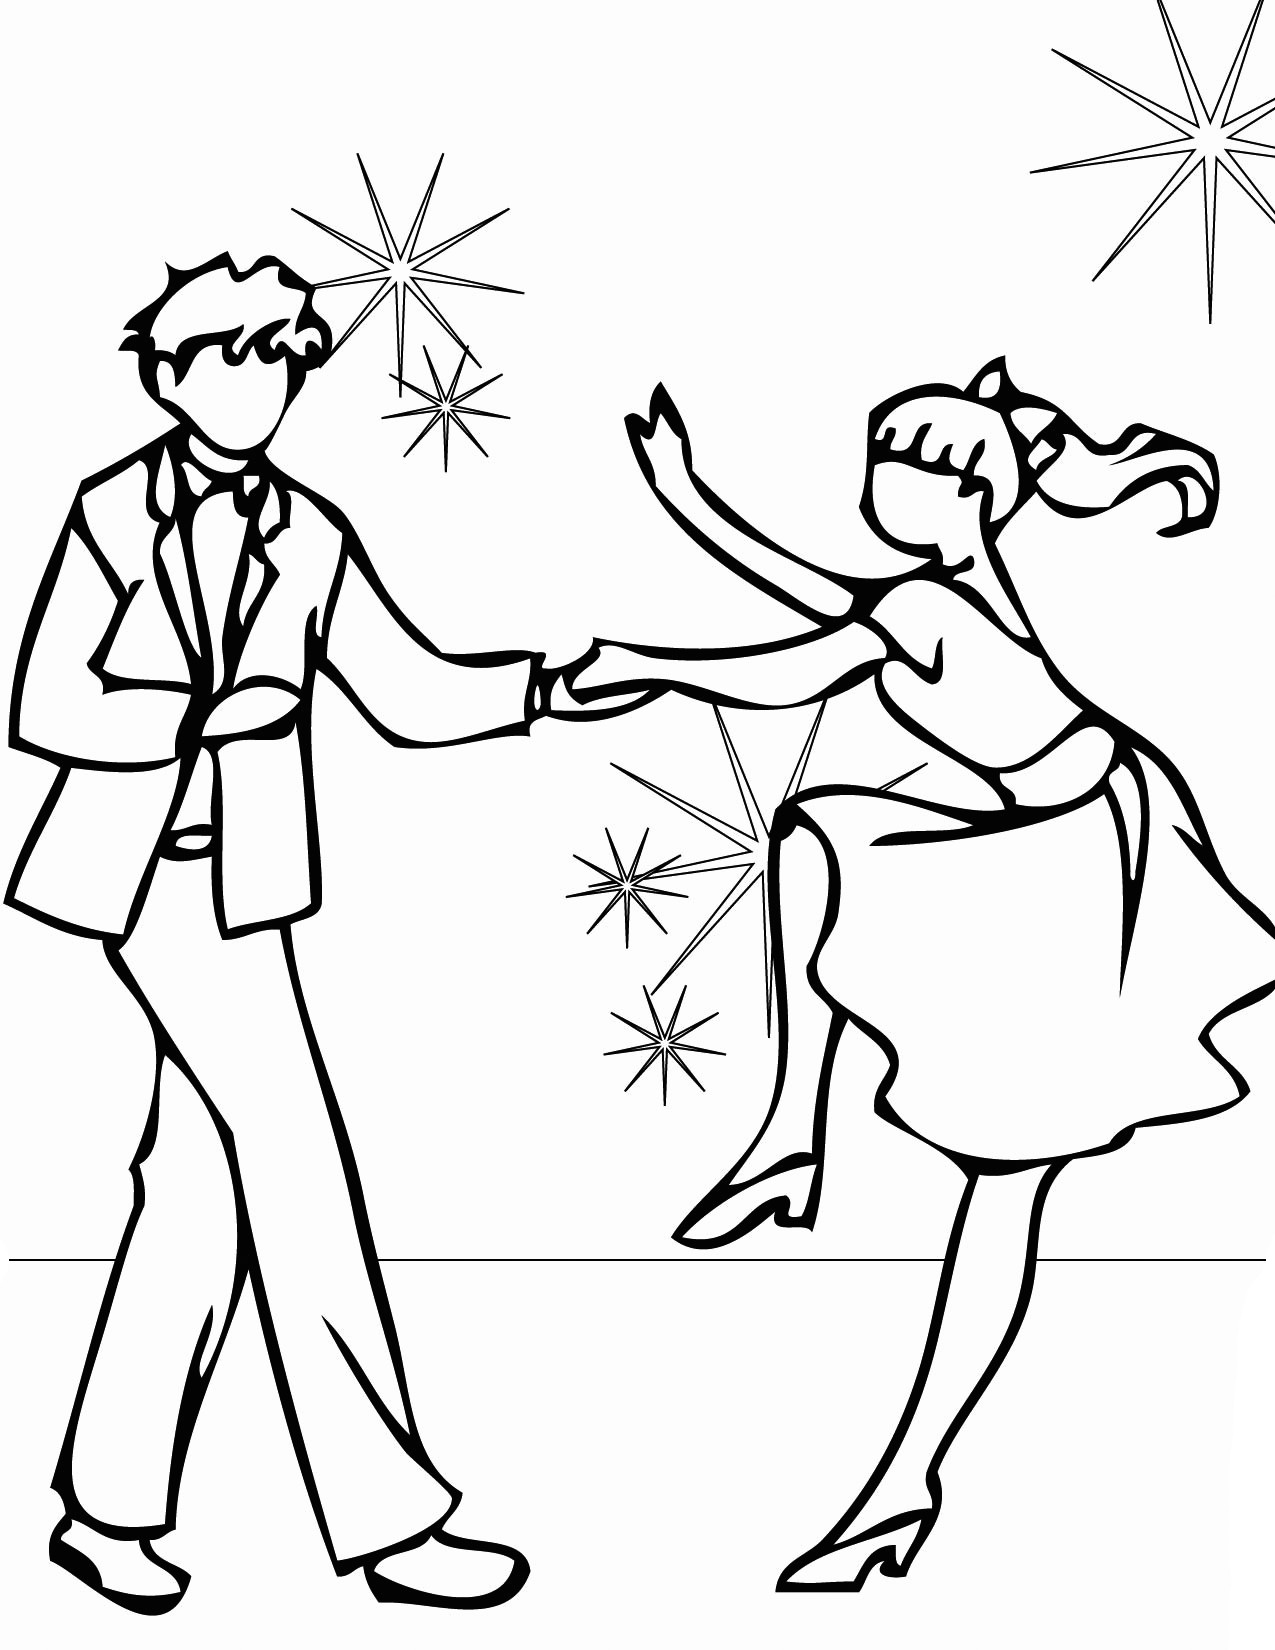 Dance Coloring Pages For Kids
 Dance Coloring Pages Best Coloring Pages For Kids